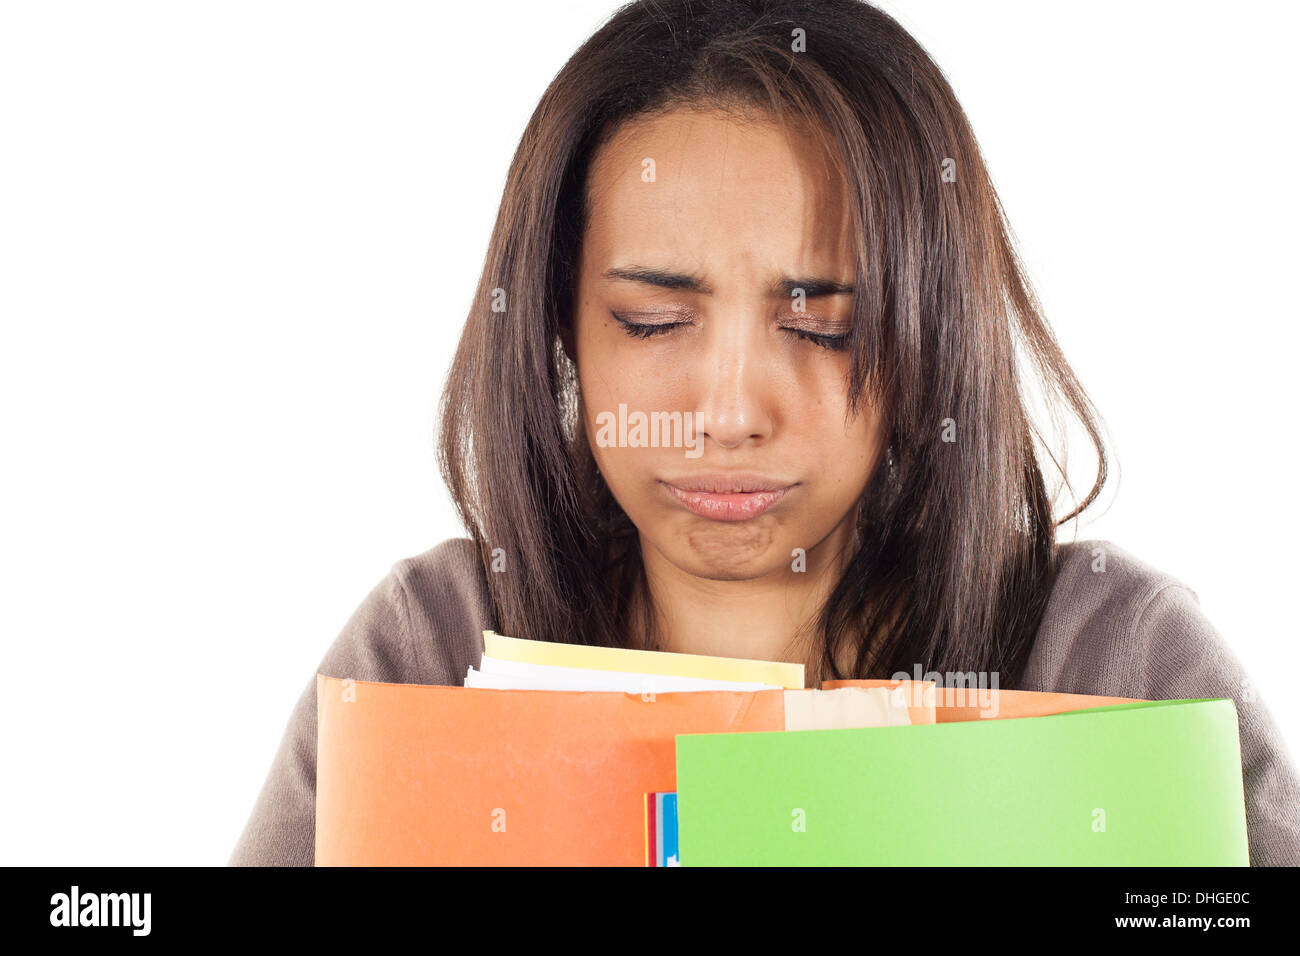 Secretary stressed which carries files Stock Photo